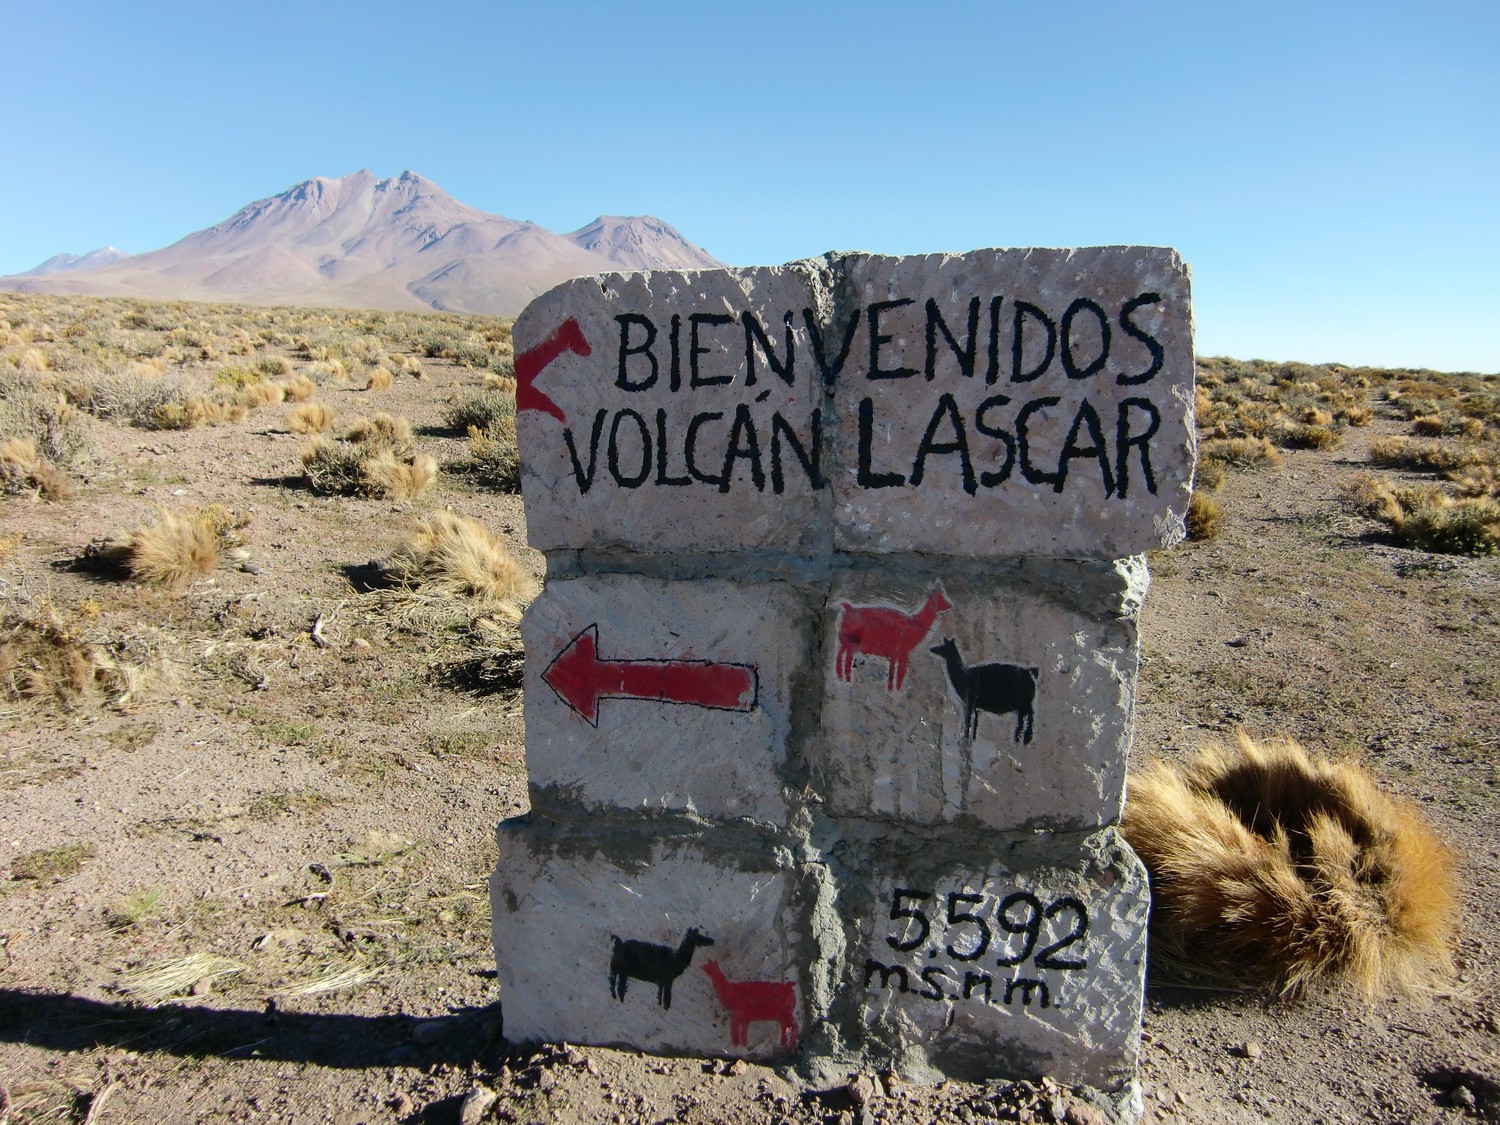 Welcome to Lascar, 5592 meters heigh